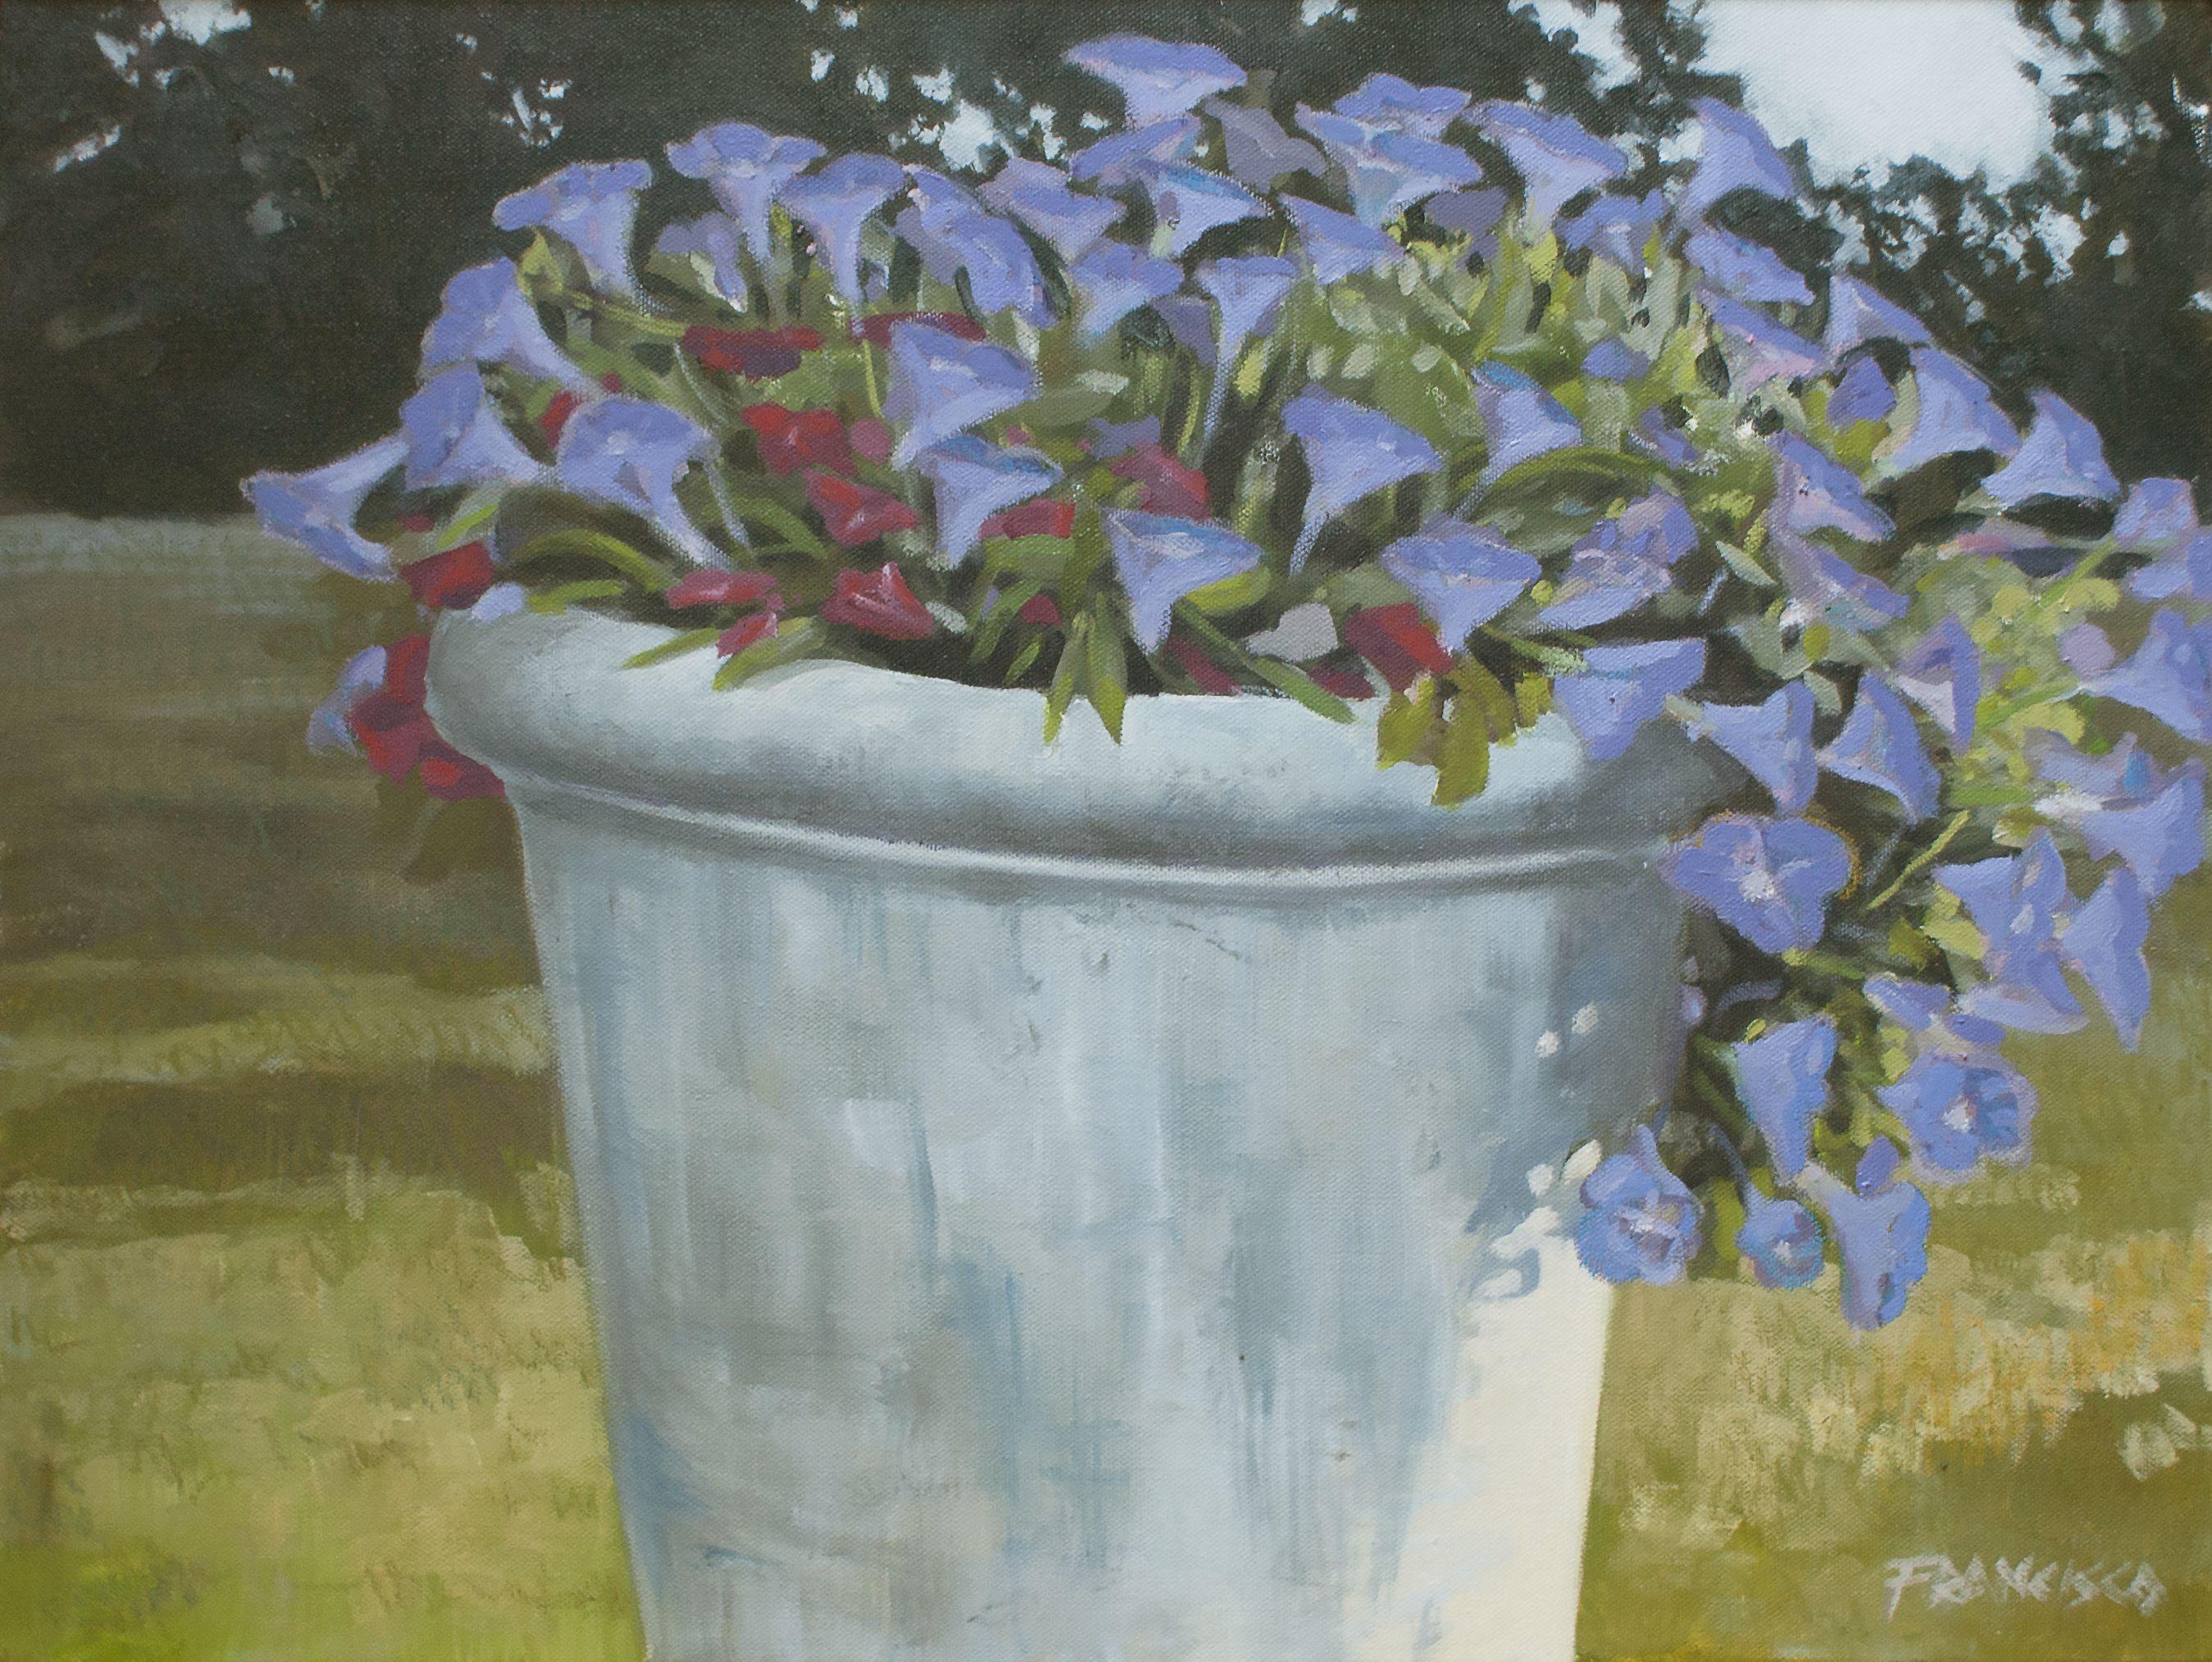 A later afternoon study of color and composition, featuring radiant blue and red flowers in a giant urn.   :: Painting :: Realism :: This piece comes with an official certificate of authenticity signed by the artist :: Ready to Hang: Yes :: Signed: